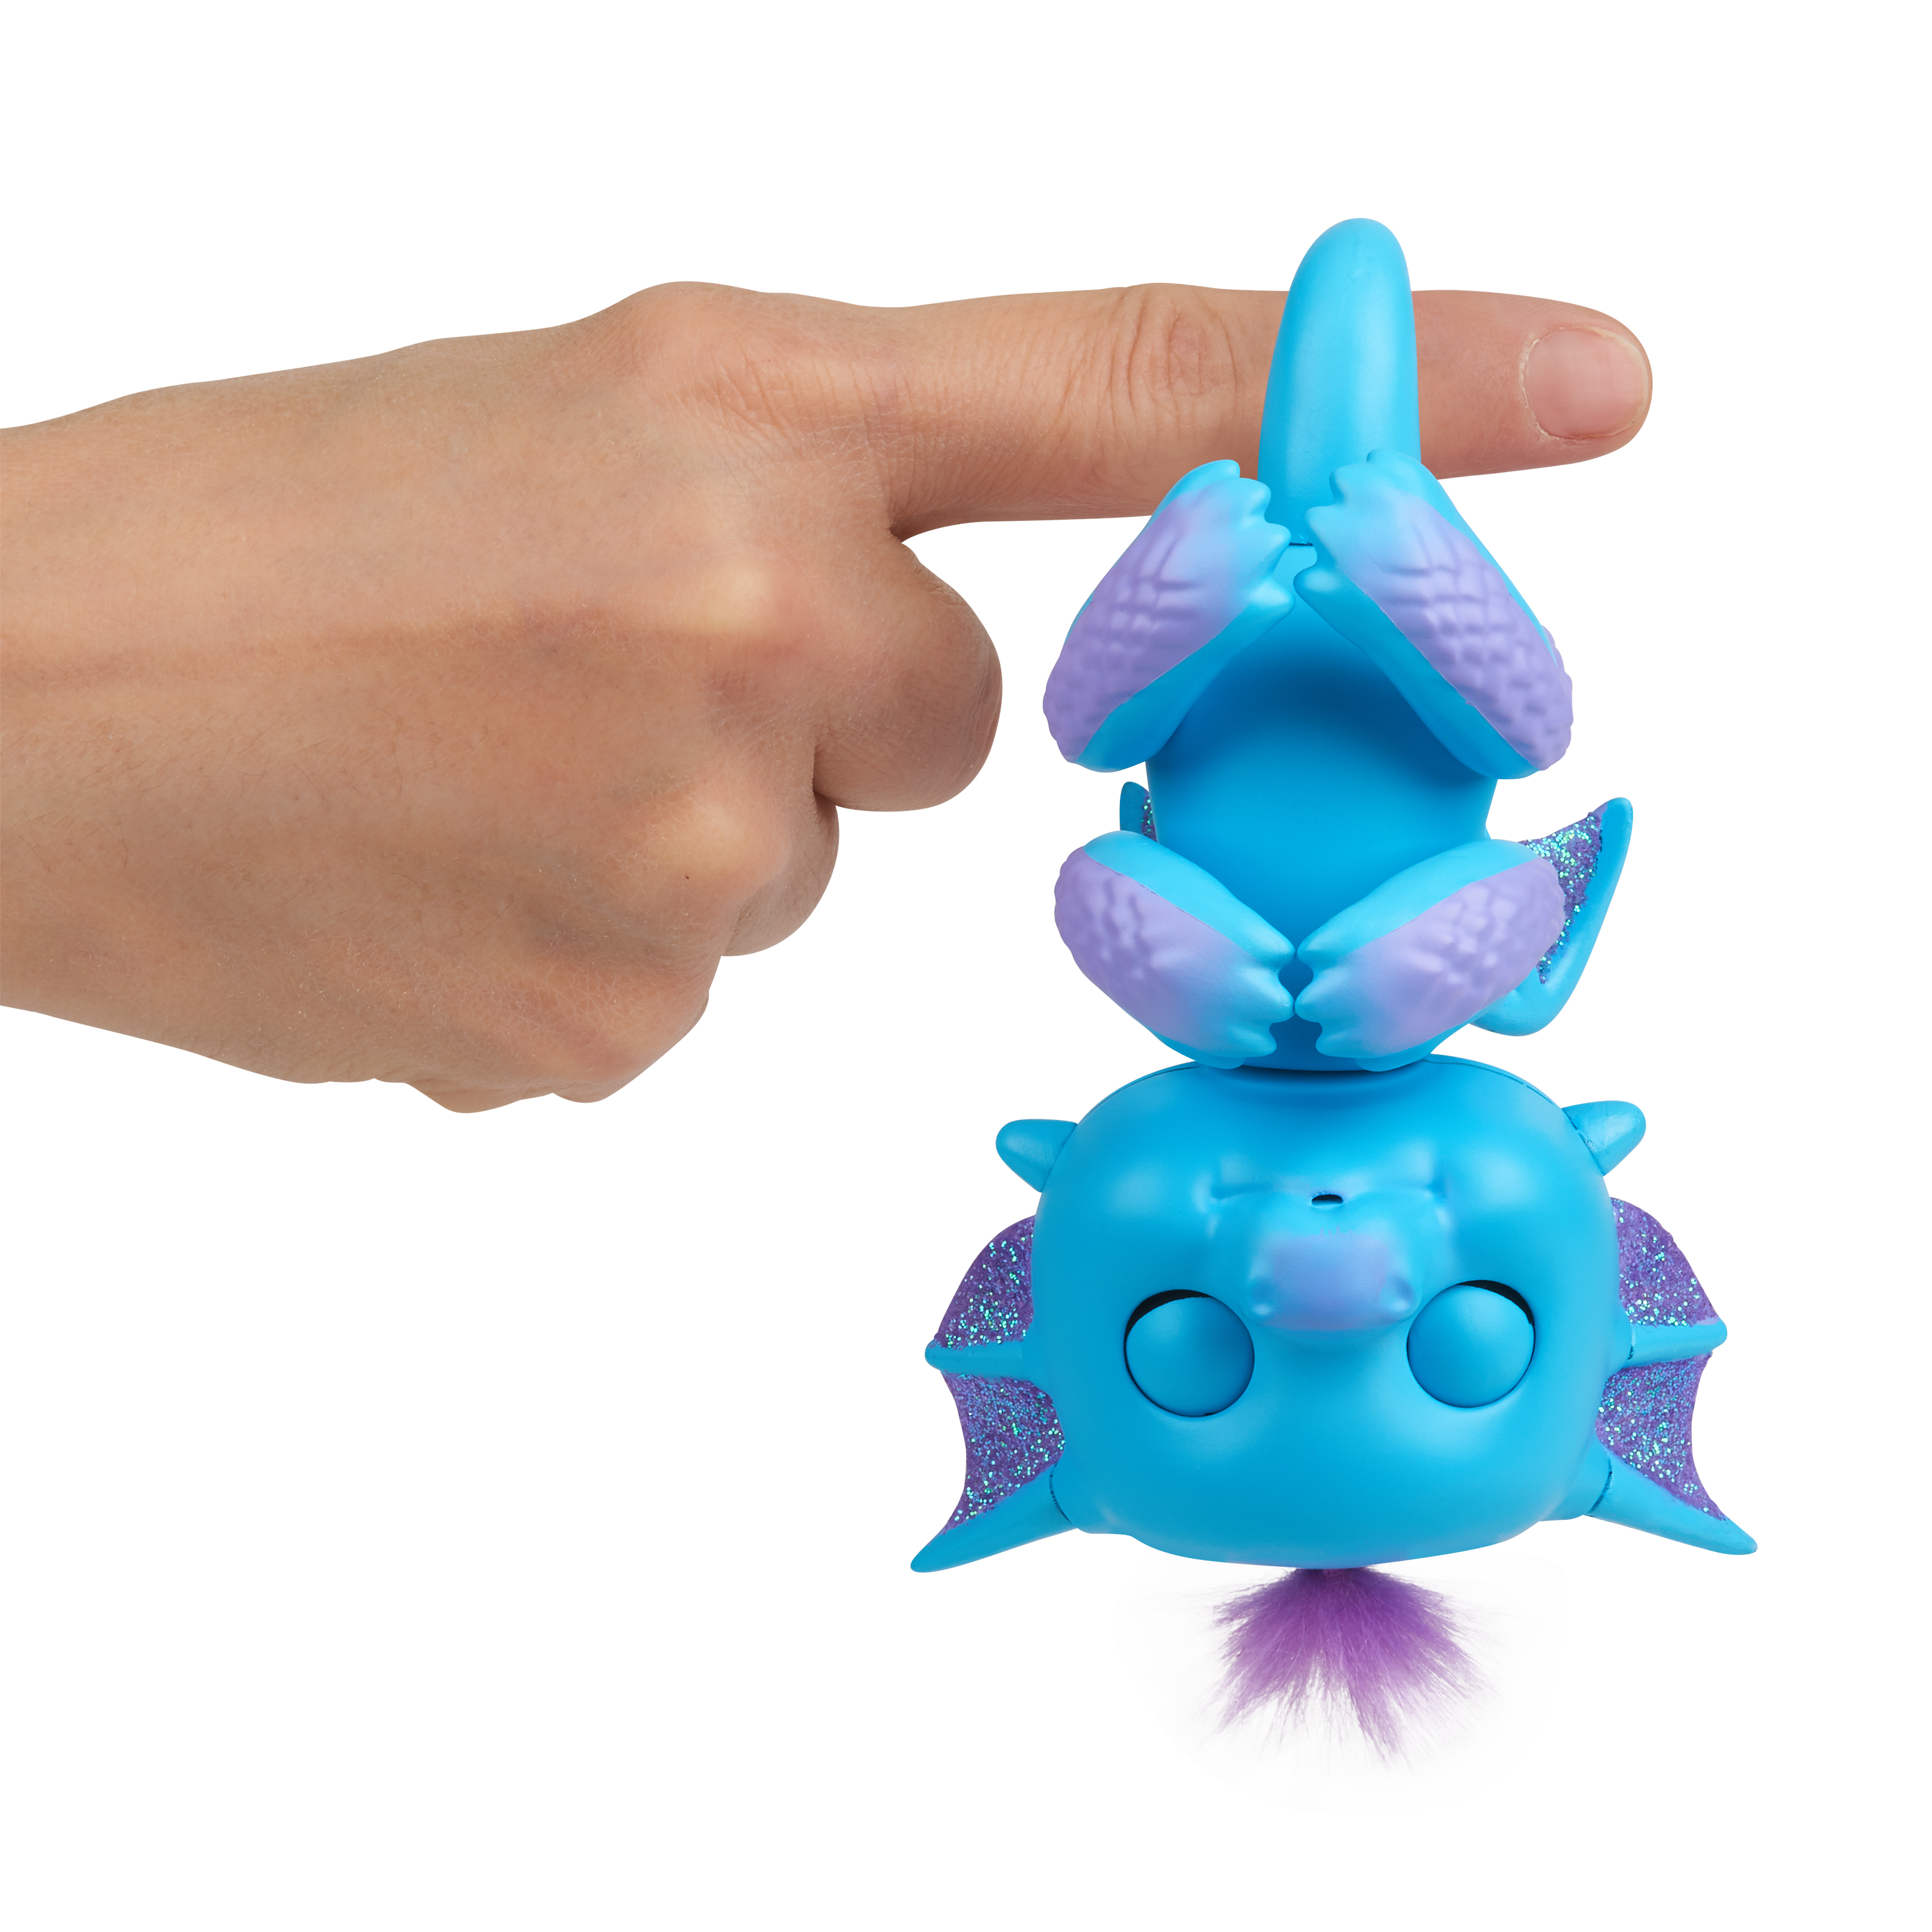 Fingerlings - Glitter Dragon - Tara (Blue with Purple) - Interactive Baby Collectible Pet - By WowWee - image 4 of 9